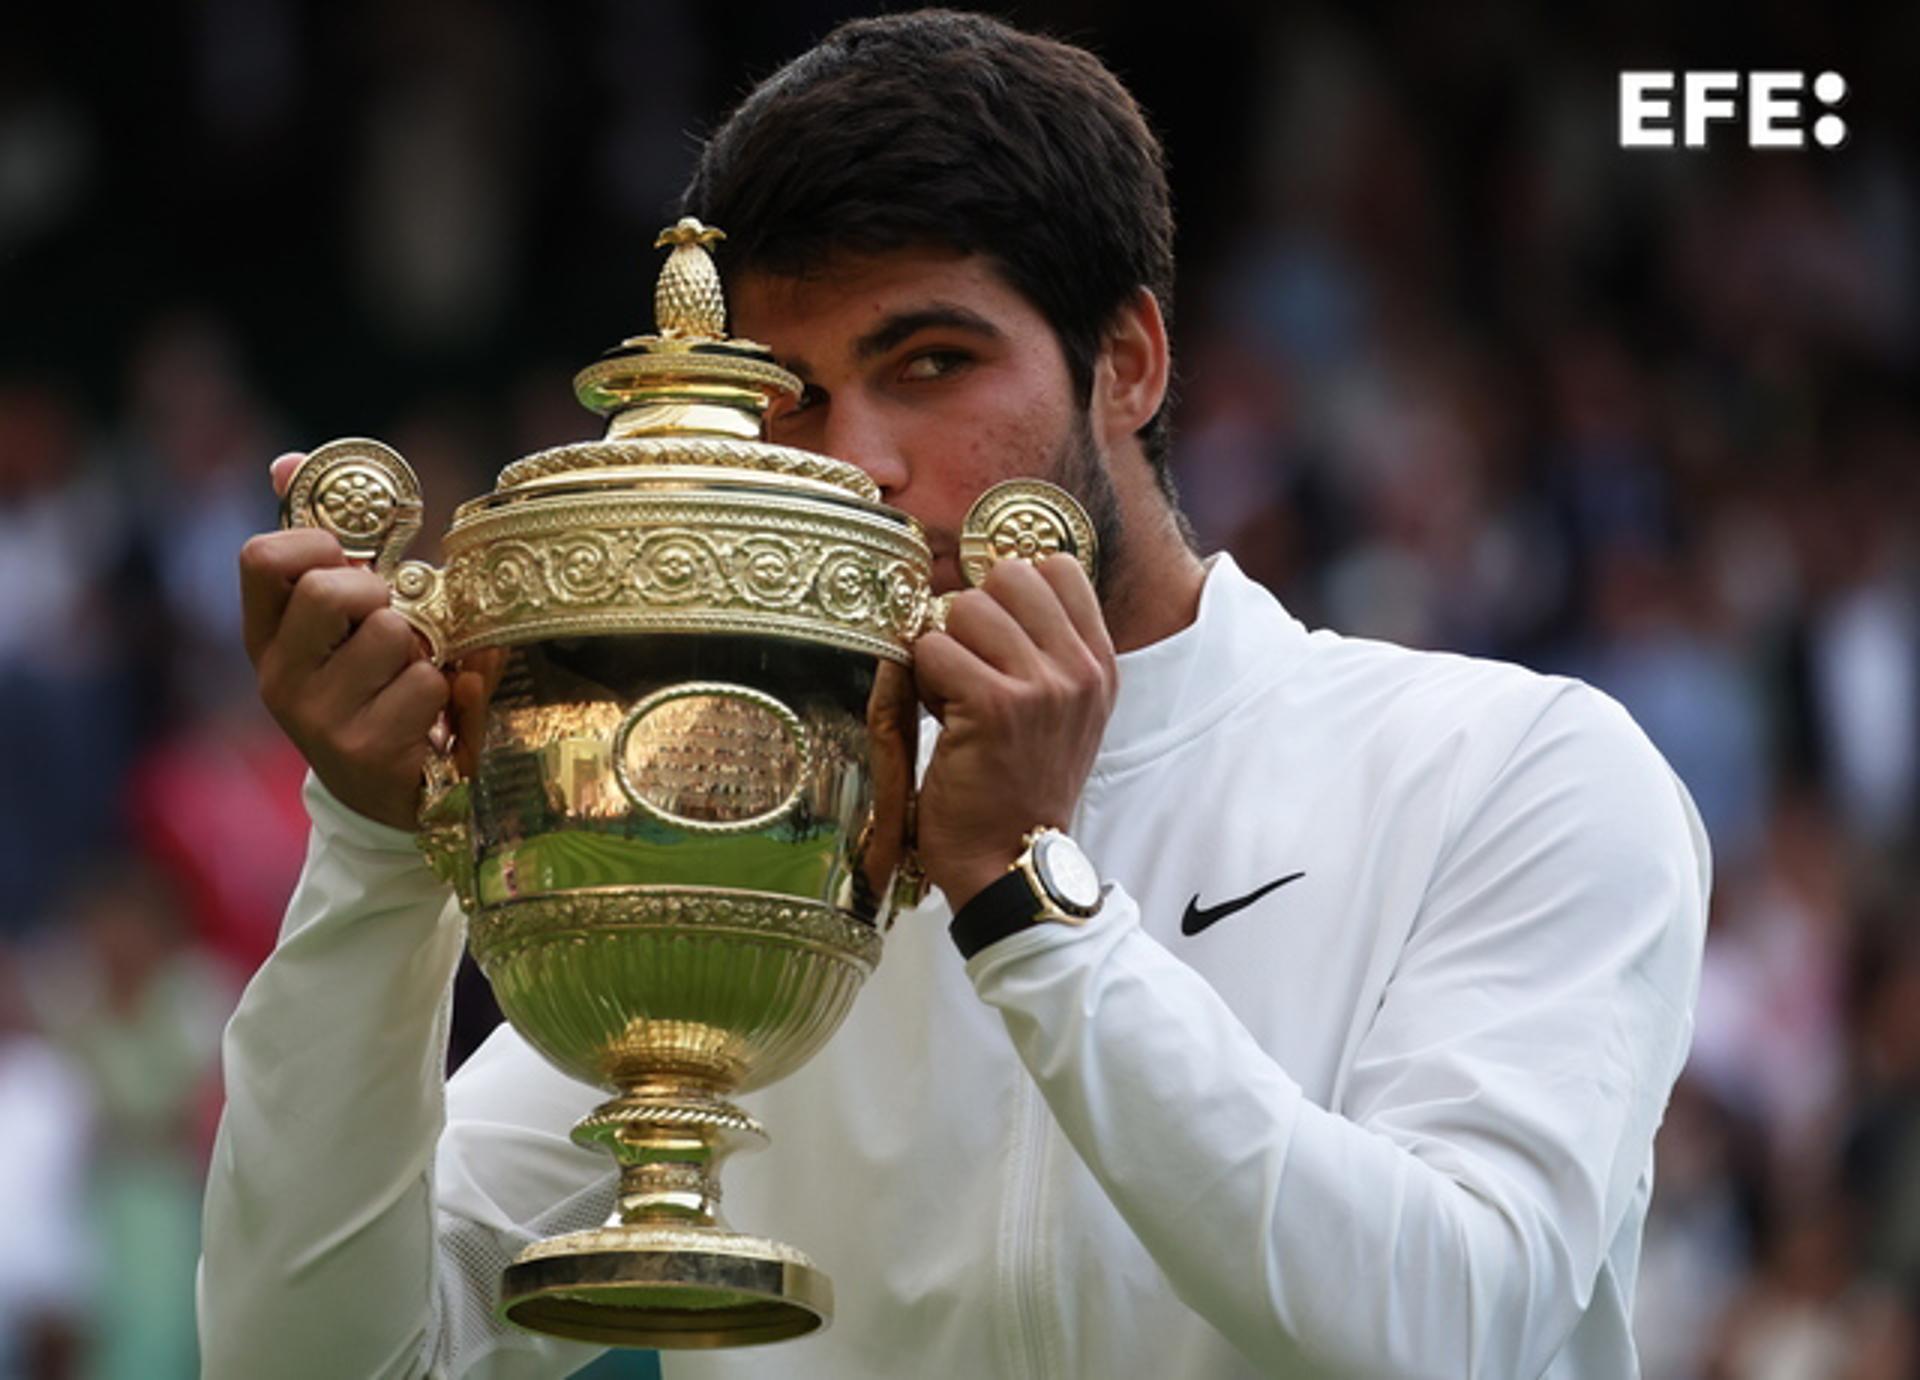 Carlos Alcaraz holds up the trophy after defeating Novak Djokovic in the men's final at the Wimbledon Championships in London on 16 July 2023. EFE/EPA/NEIL HALL/EDITORIAL USE ONLY